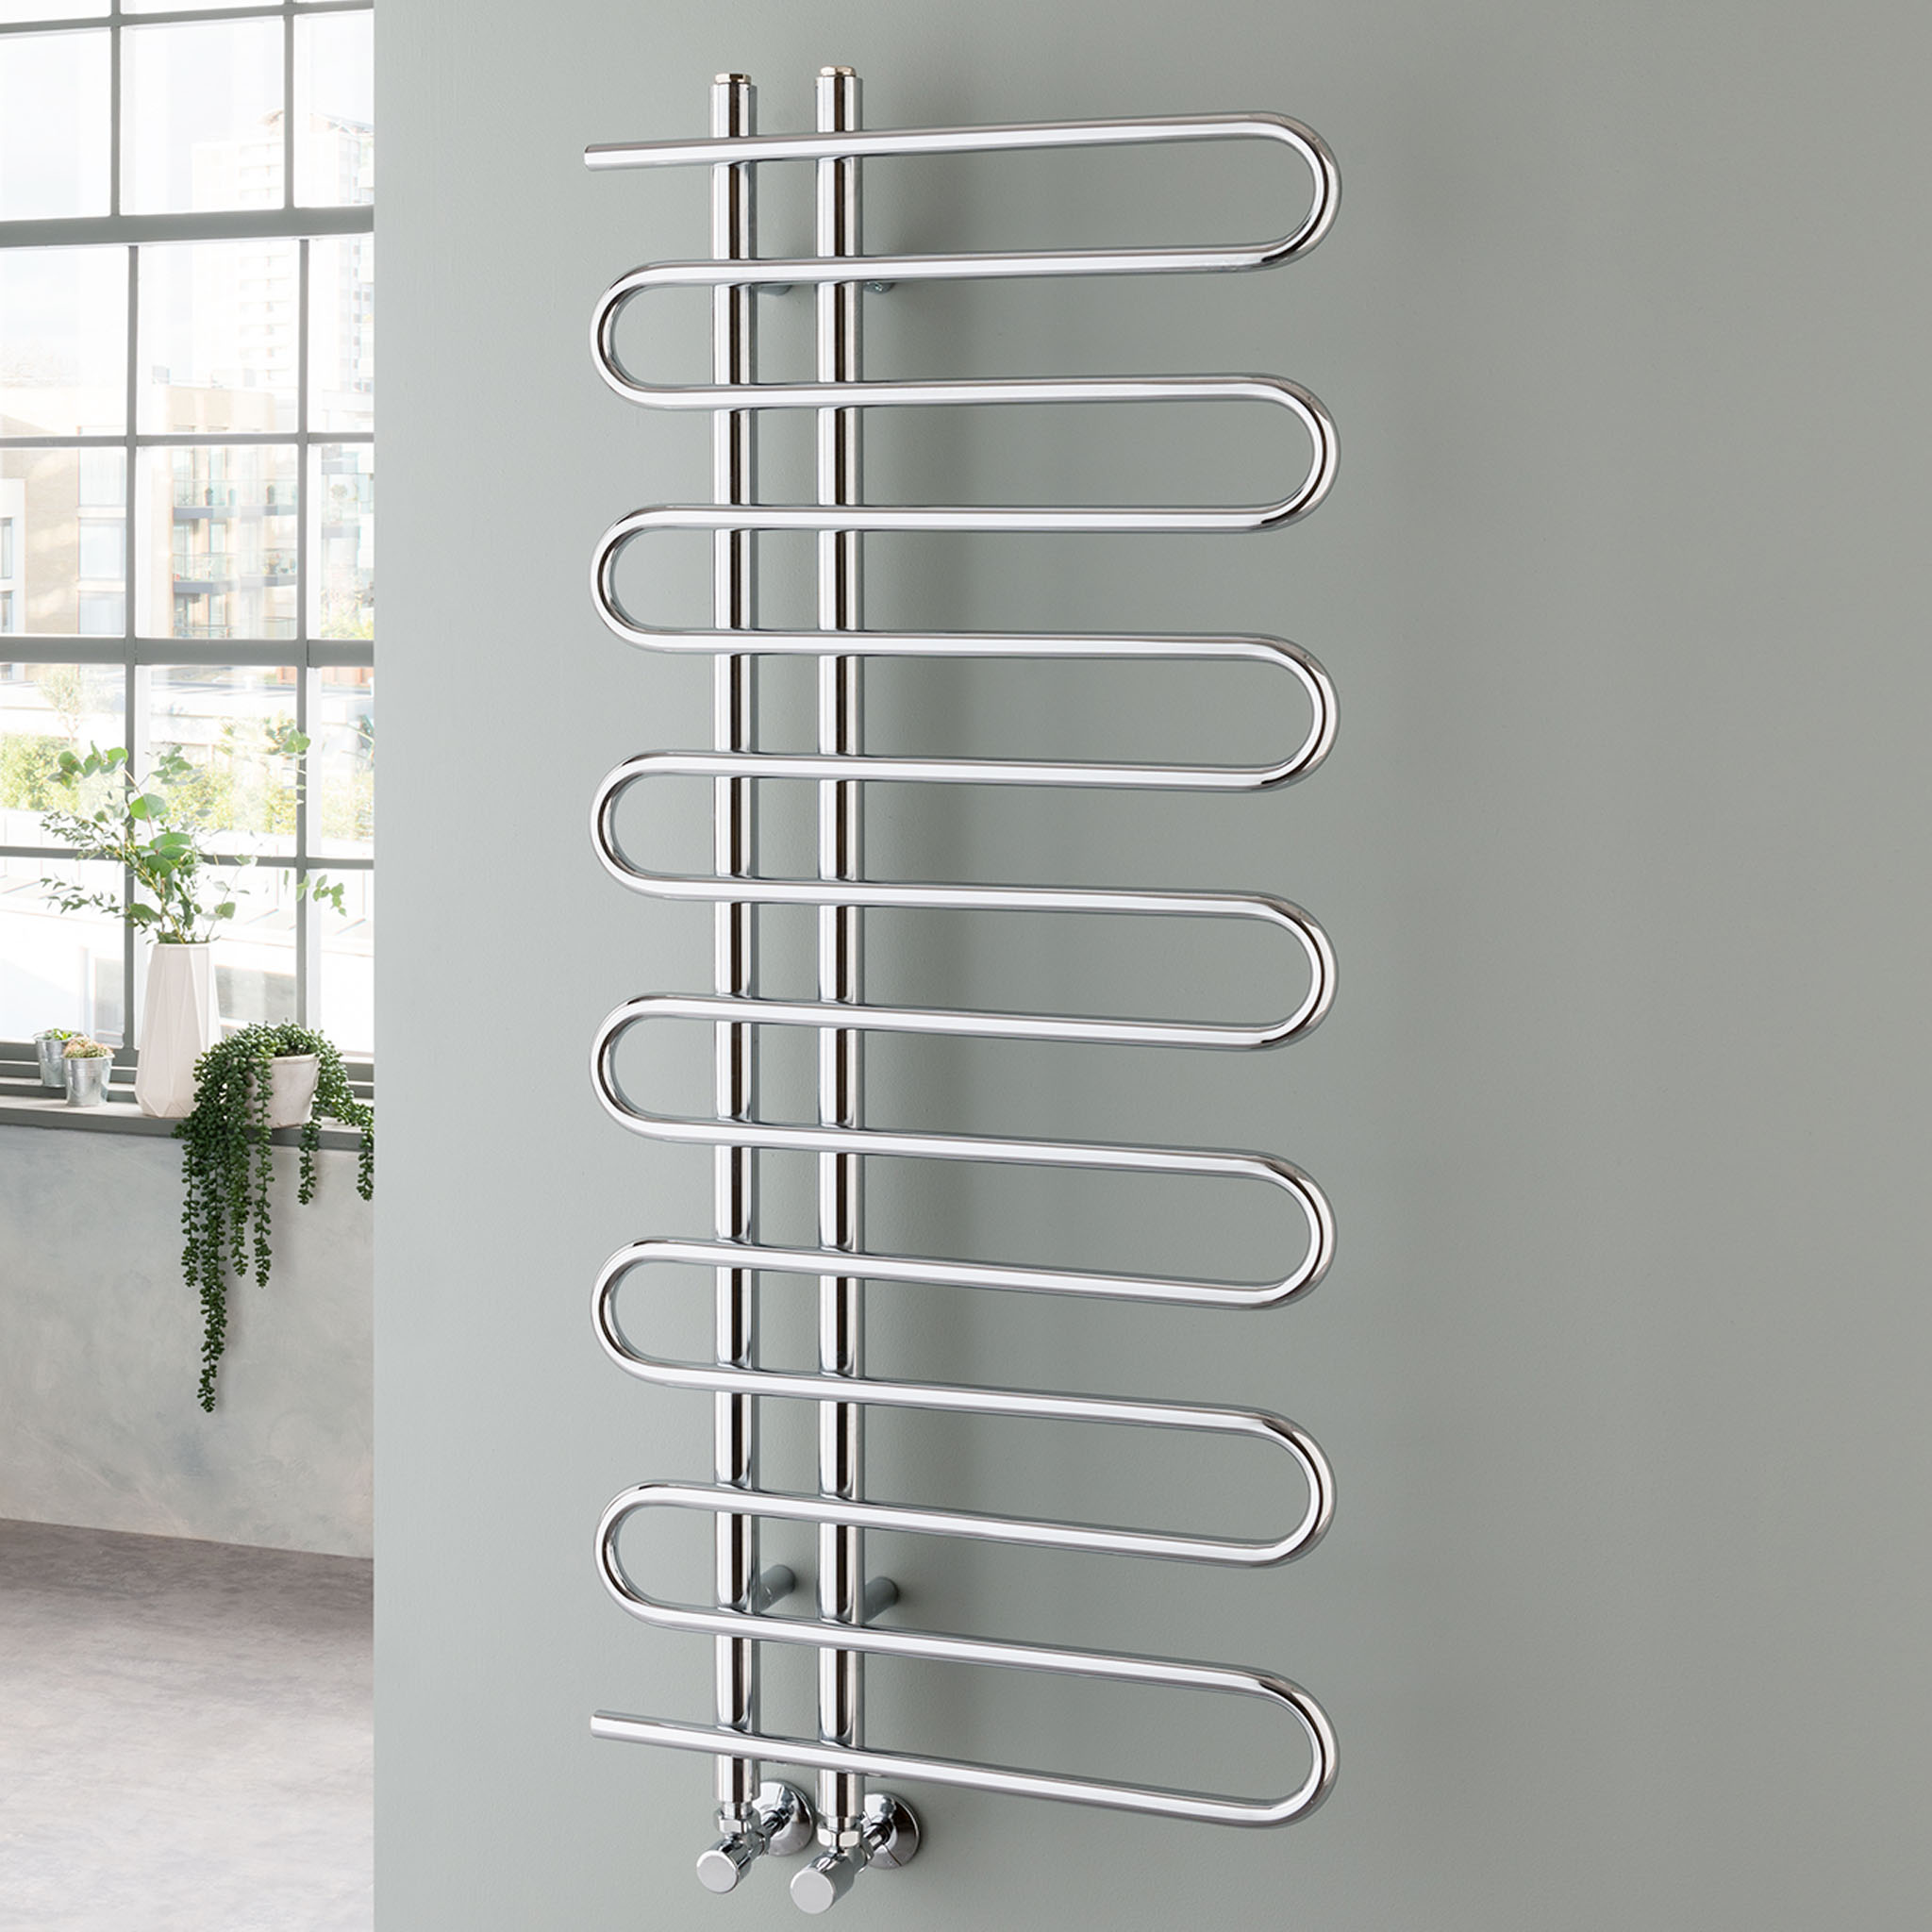 Vogue Concertina Wall Mounted Heated Towel Rail